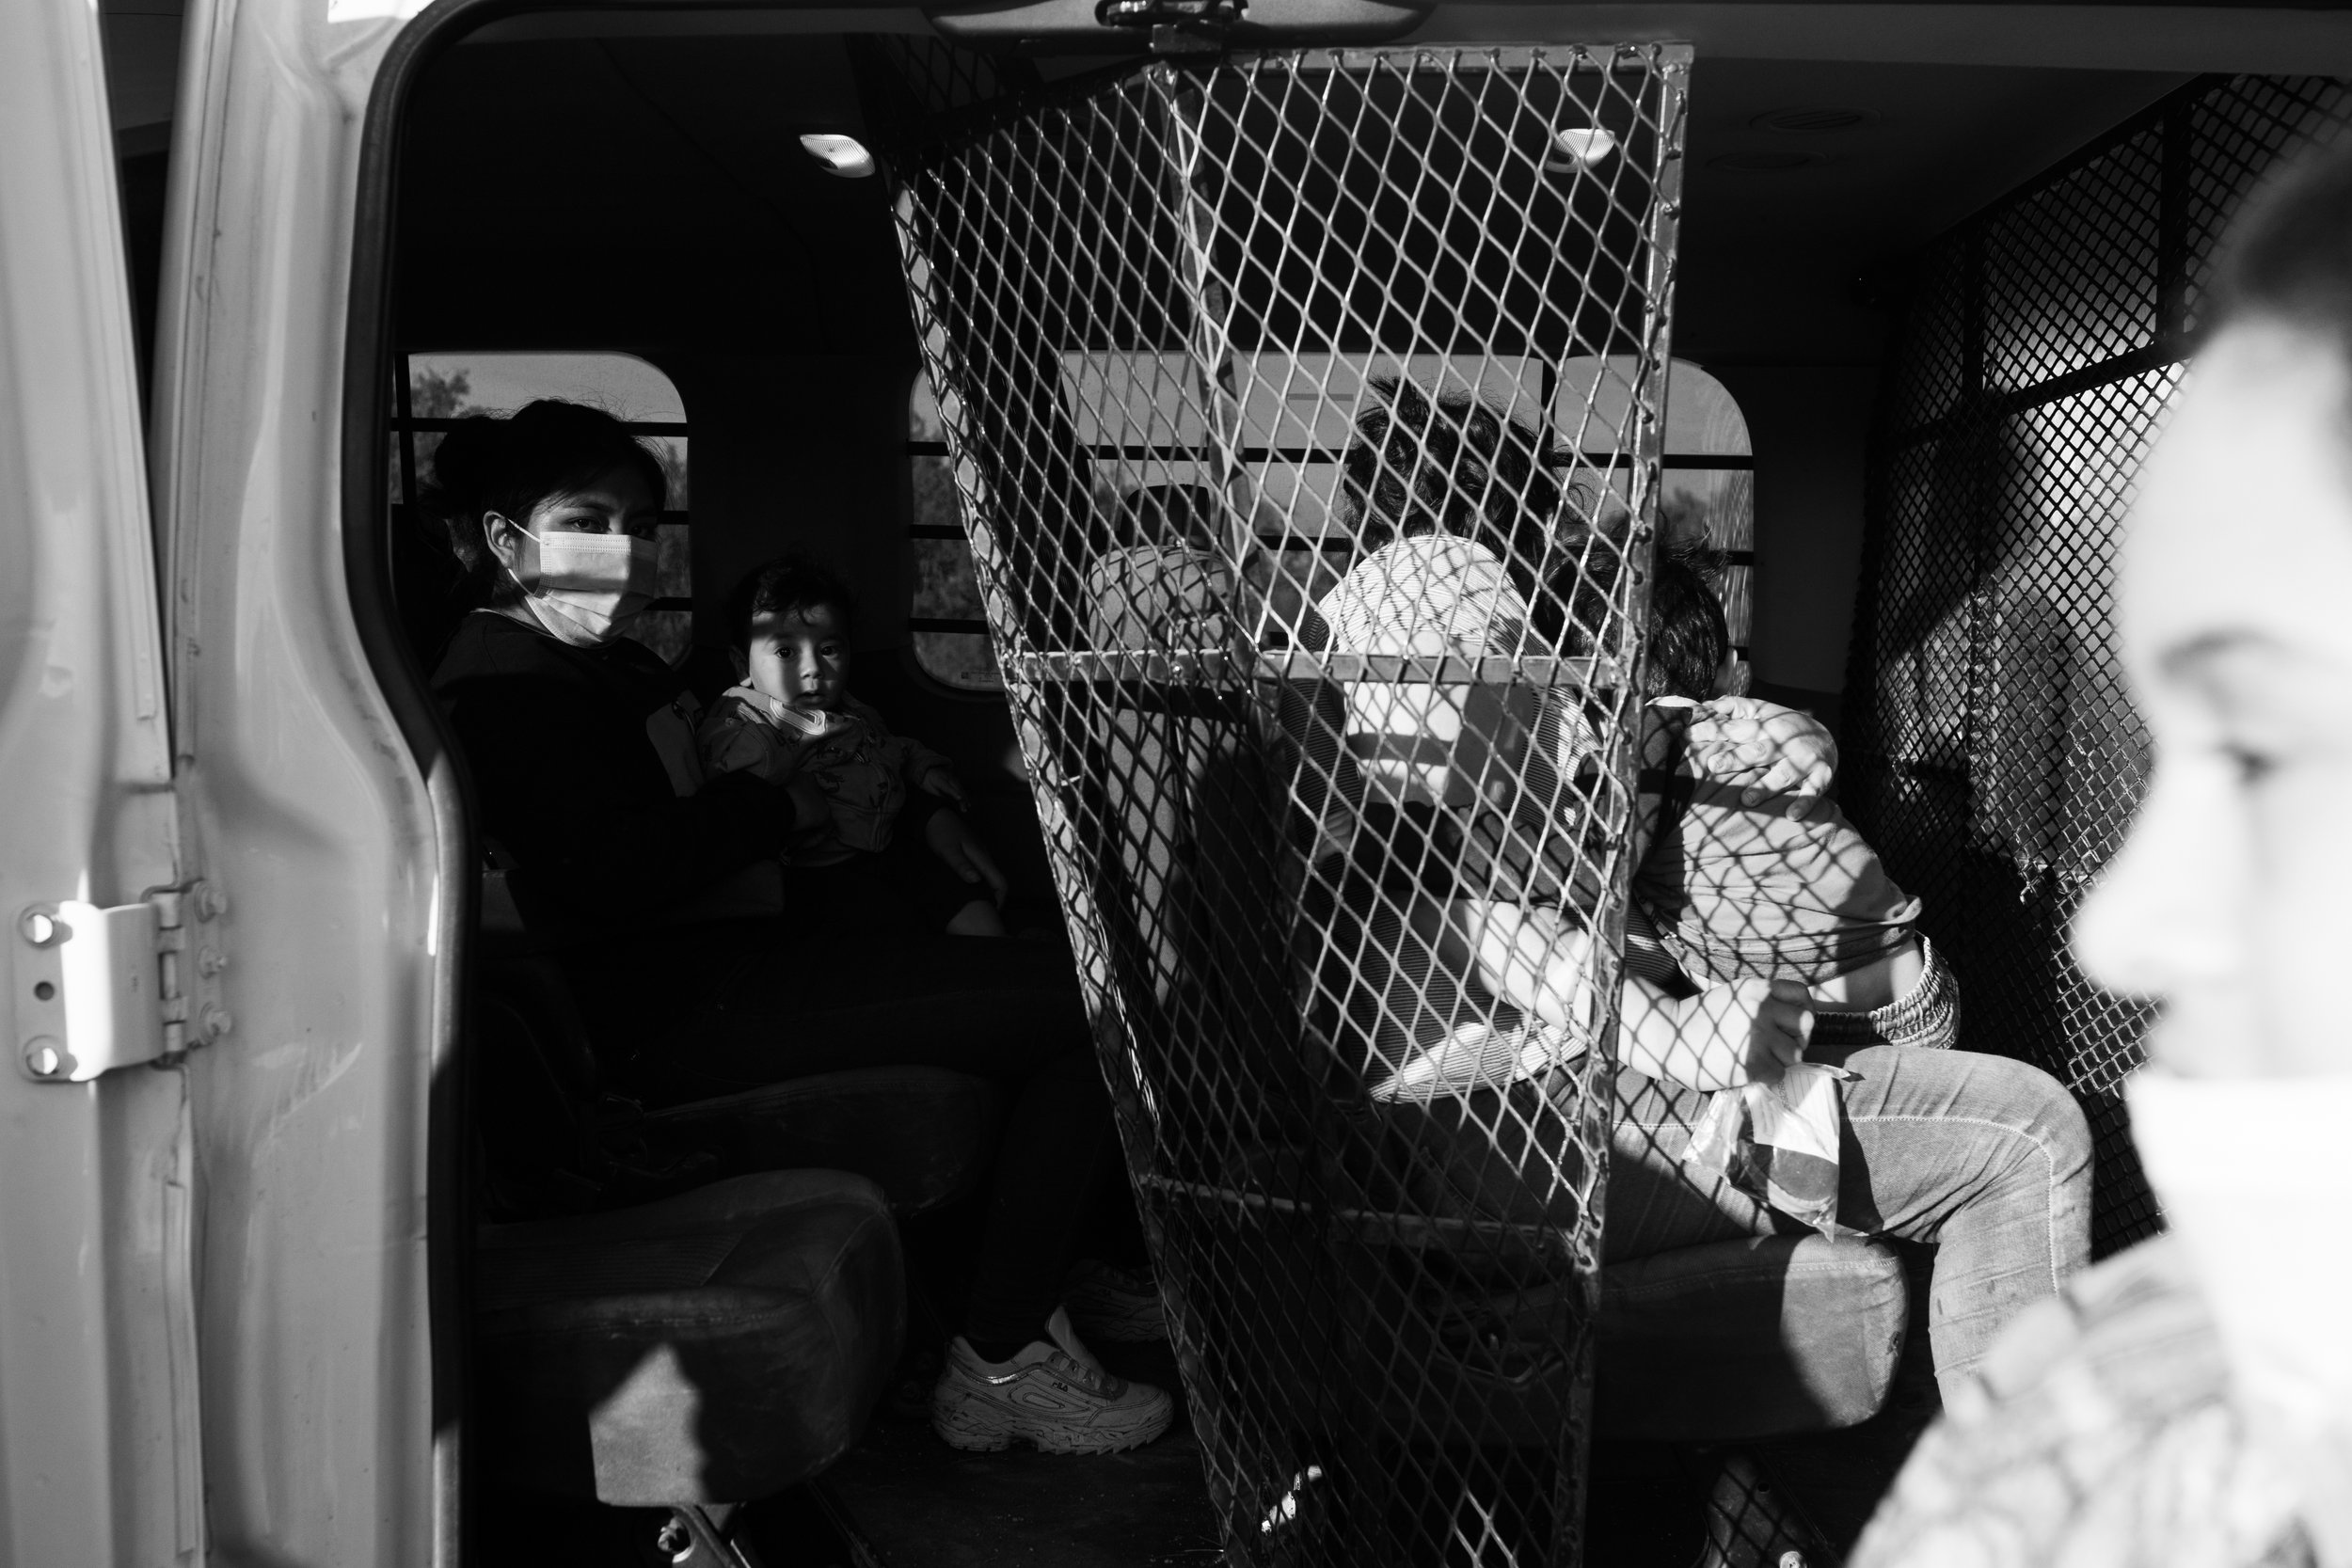  A mother and her child sit waiting to be transported in a Border Patrol vehicle in La Joya, Texas. 